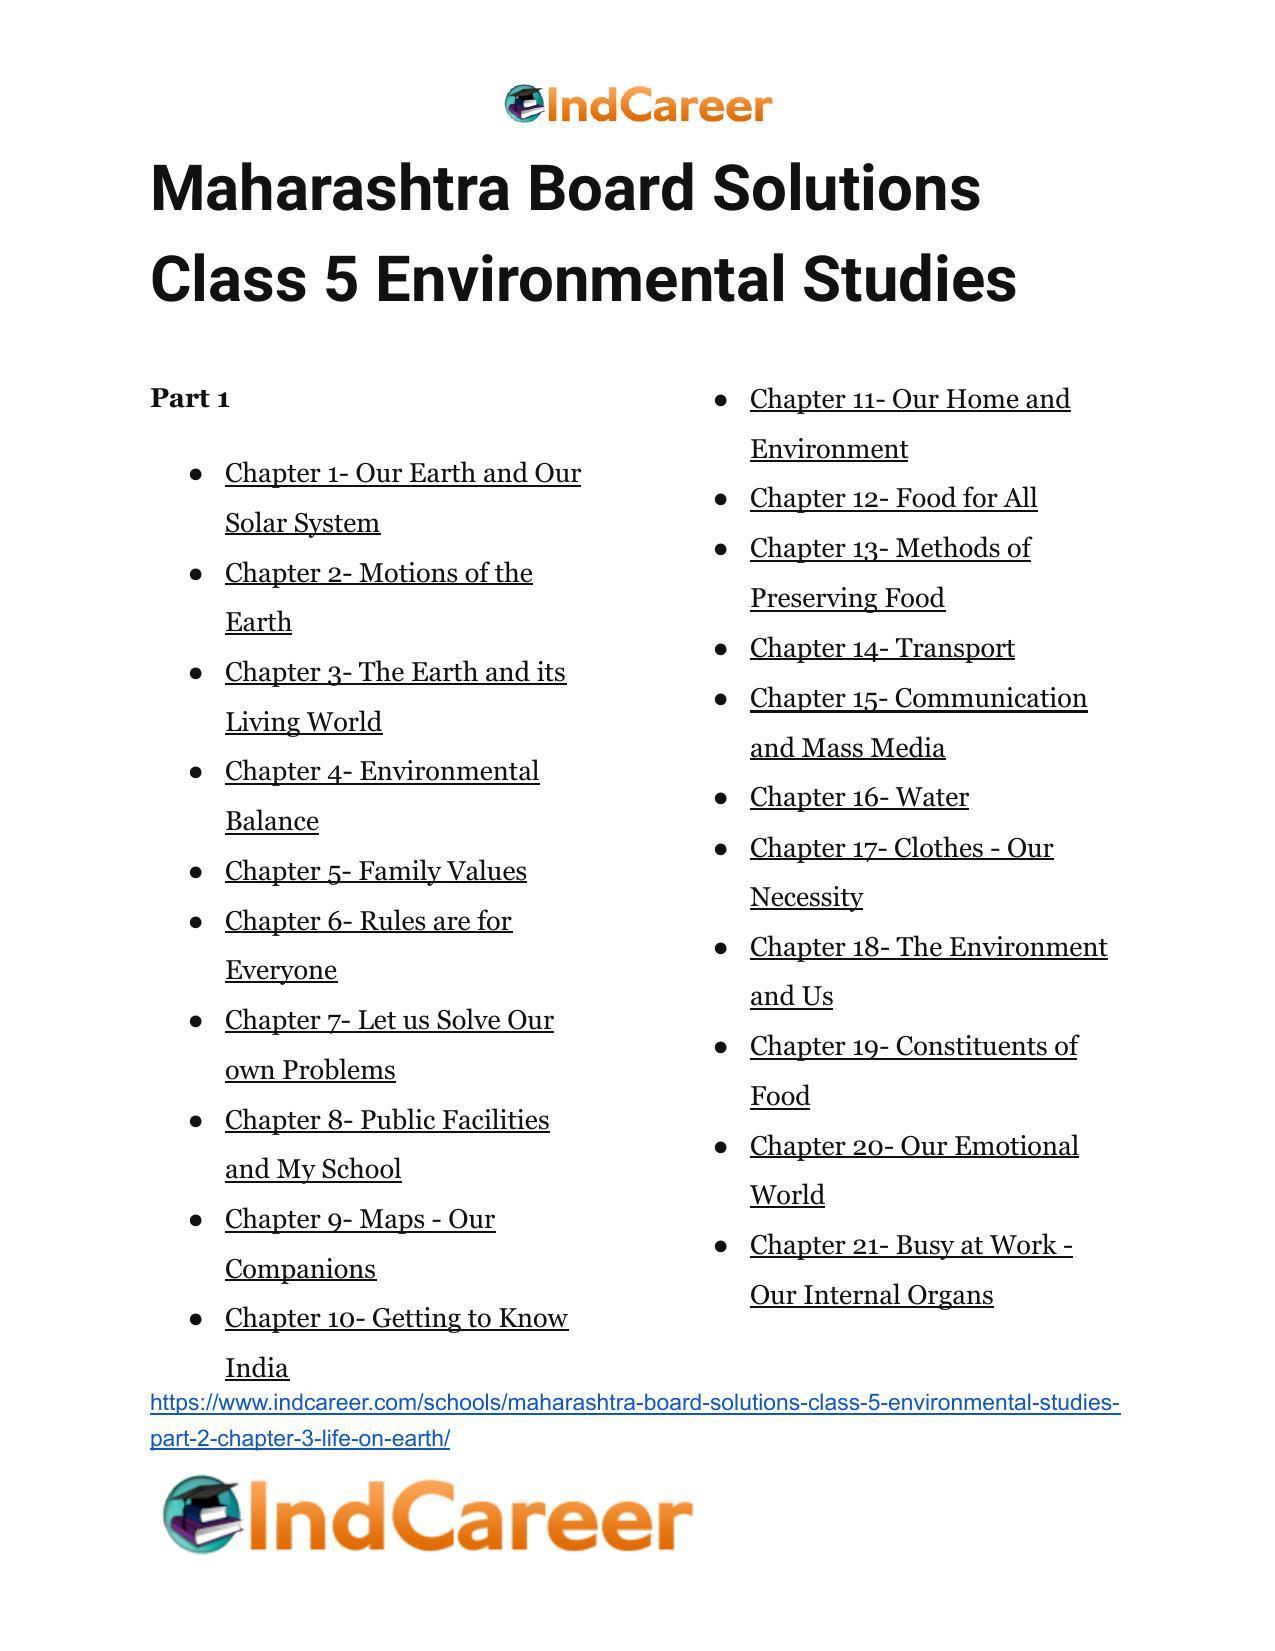 Maharashtra Board Solutions Class 5-Environmental Studies (Part 2): Chapter 3- Life on Earth - Page 10